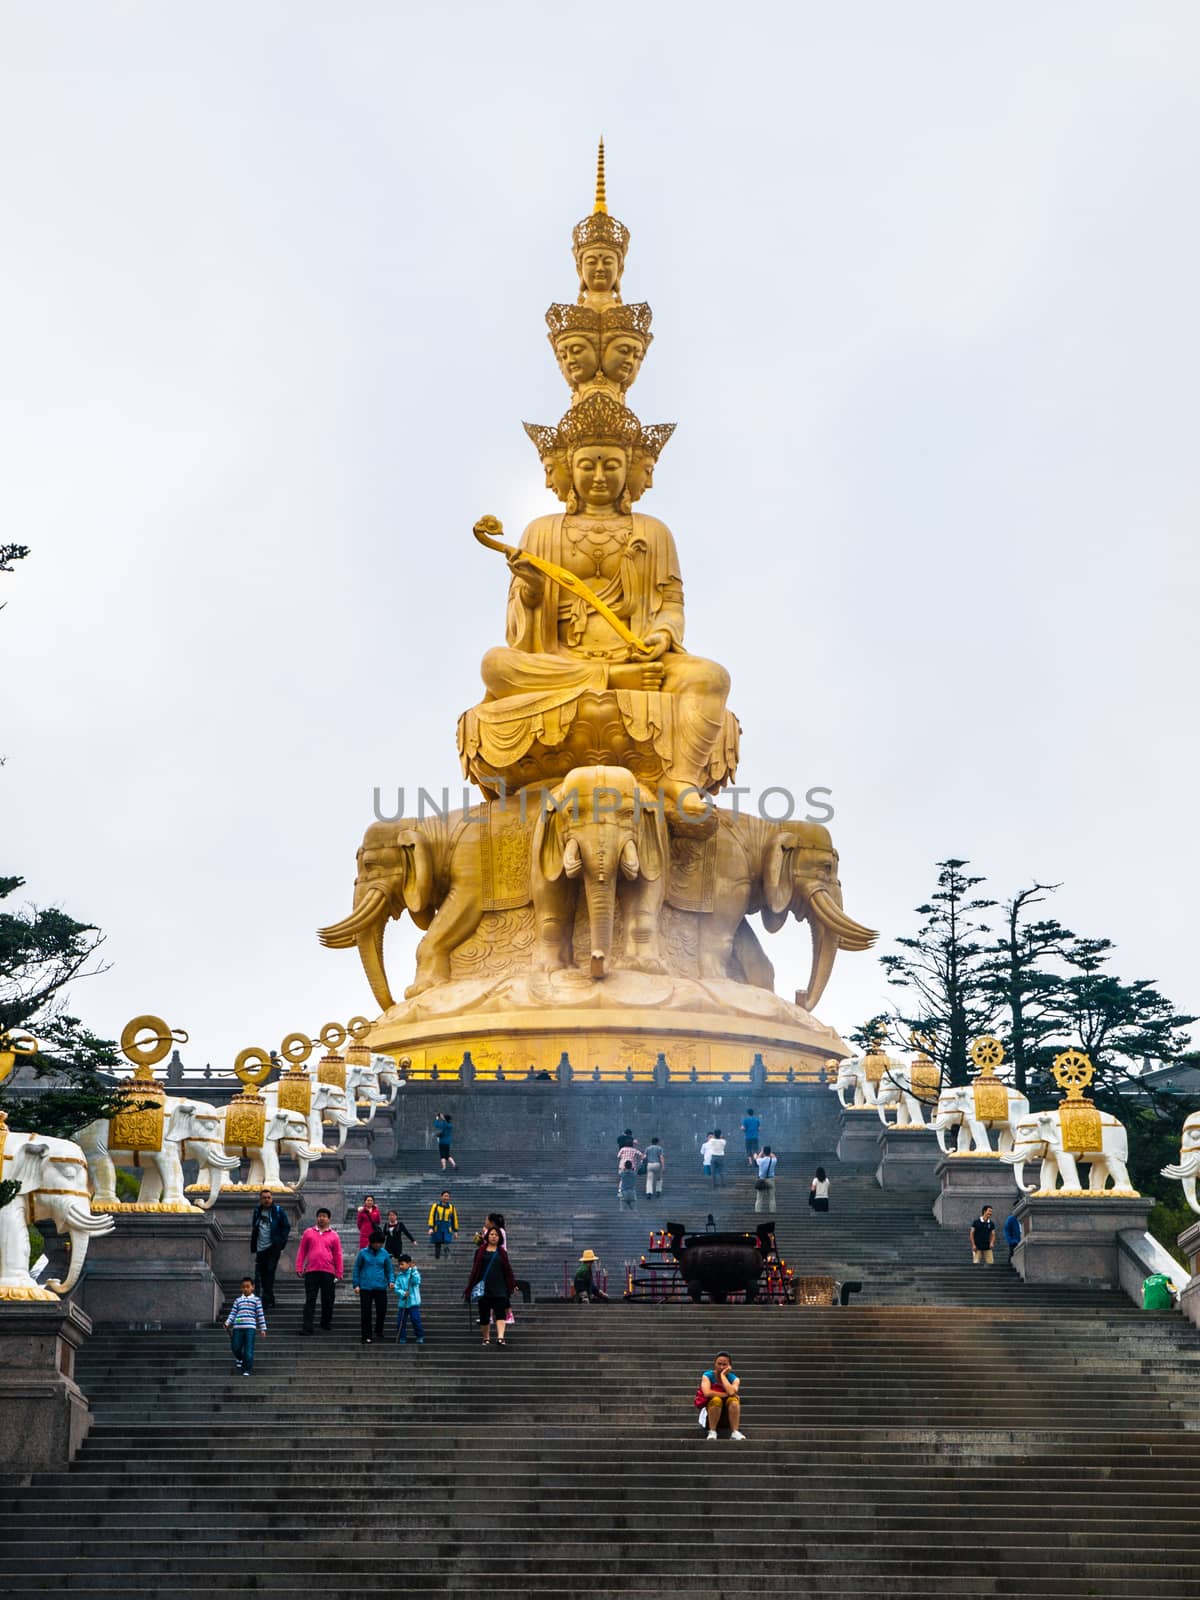 Buddha's staute on the summit of Mt. Emei (Sichuan, China)